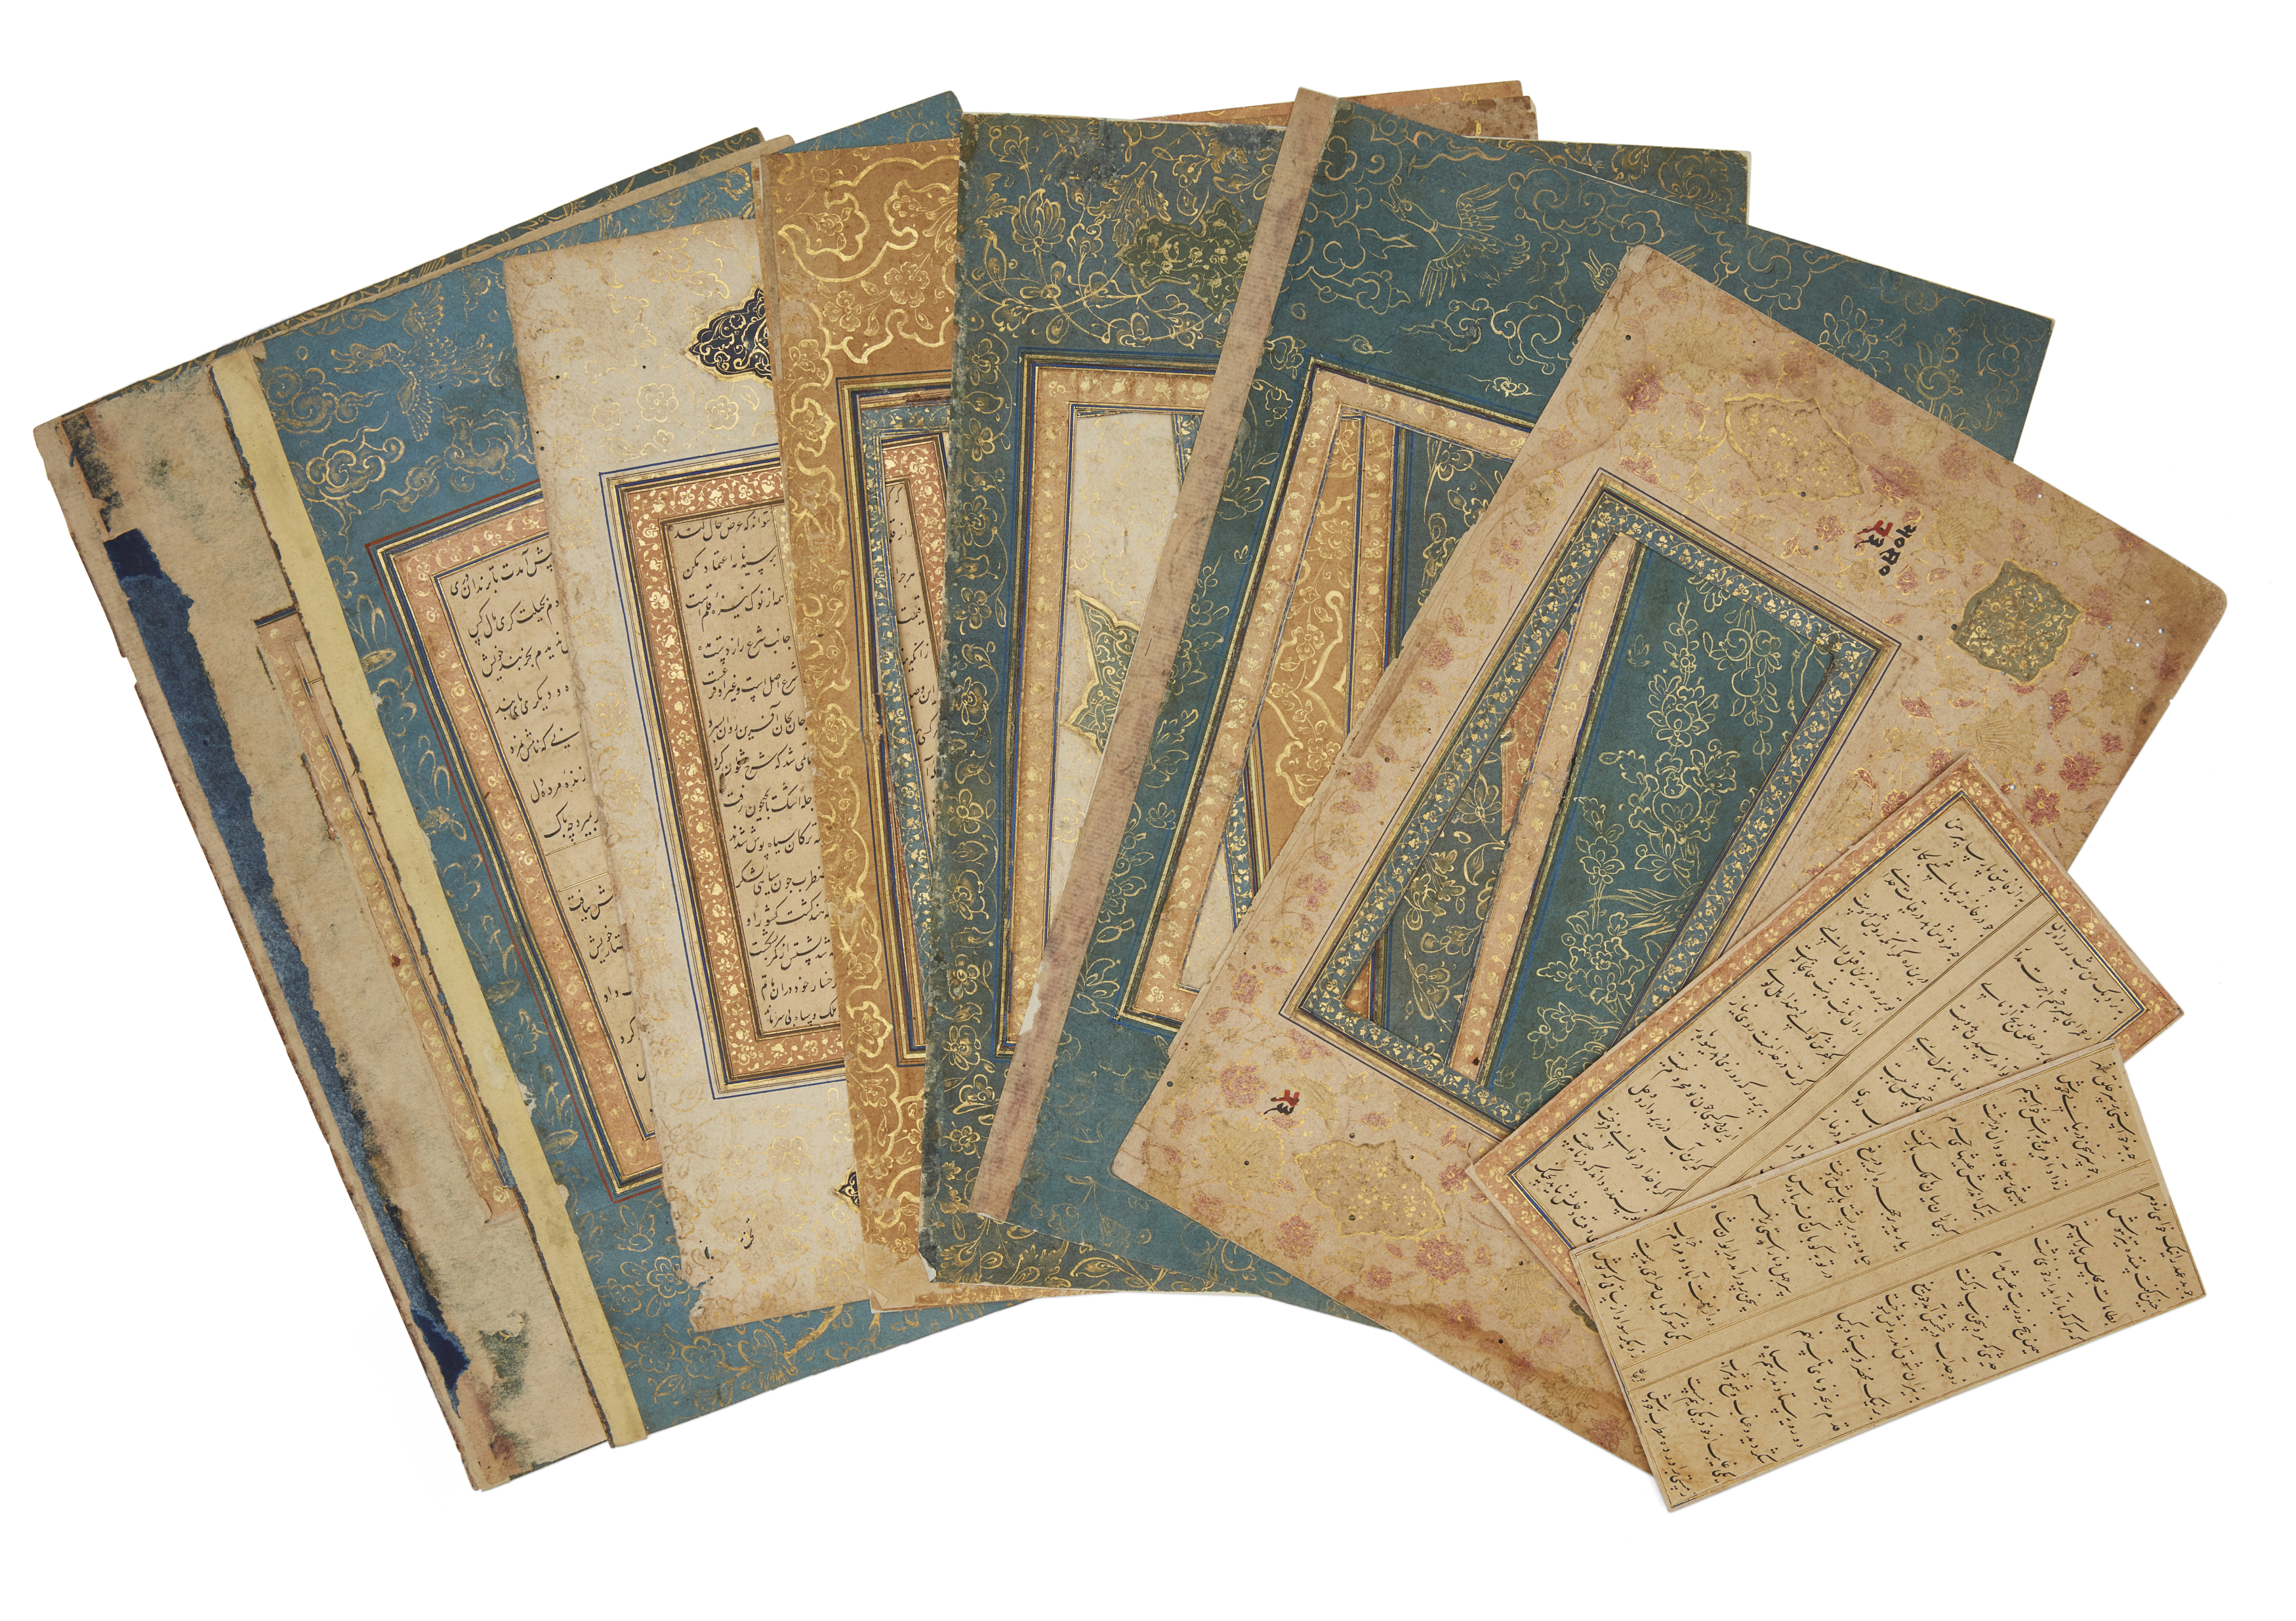 Property from An Important Private Collection To Be Sold With No Reserve Eleven detached folios... - Image 2 of 2